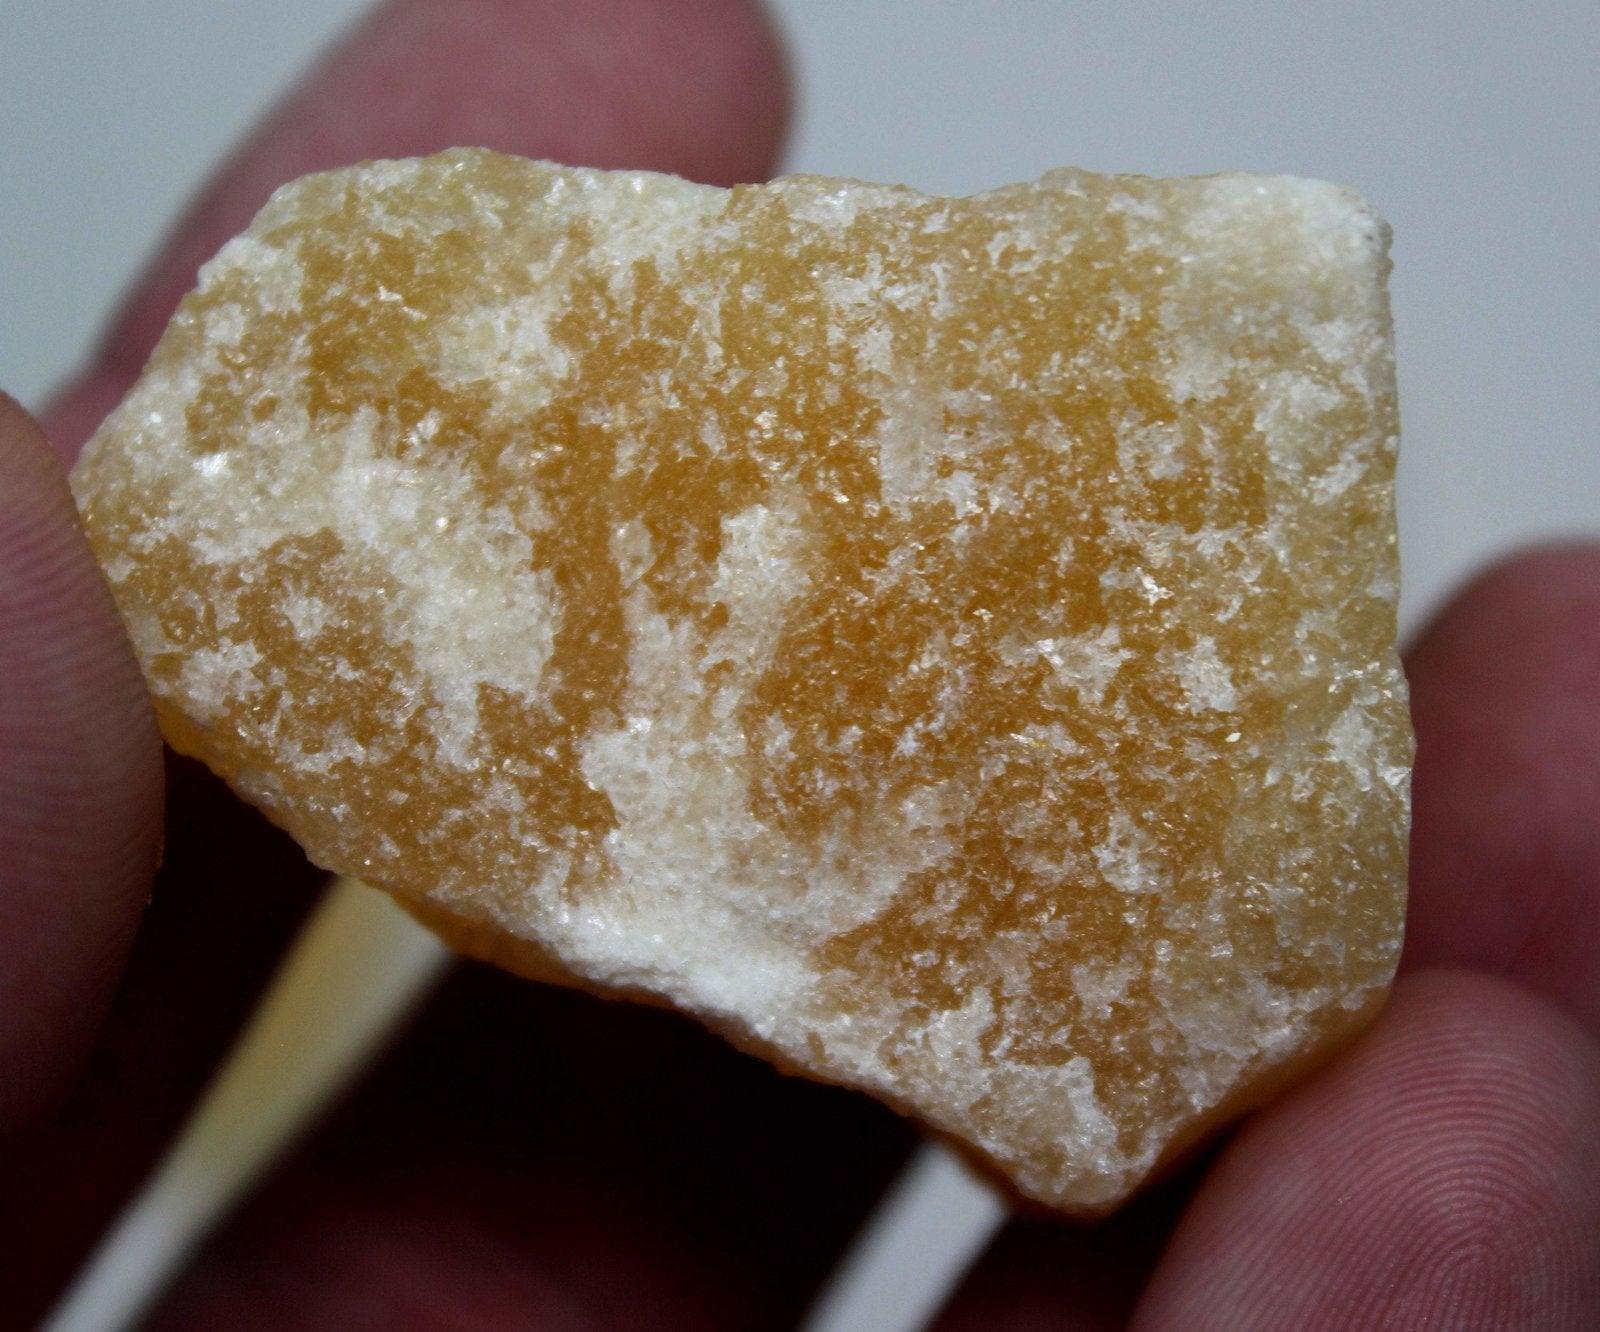 ONE Mexican Orange/Yellow Calcite Crystal! Calcium Carbonate Crystal! - LapidaryCentral